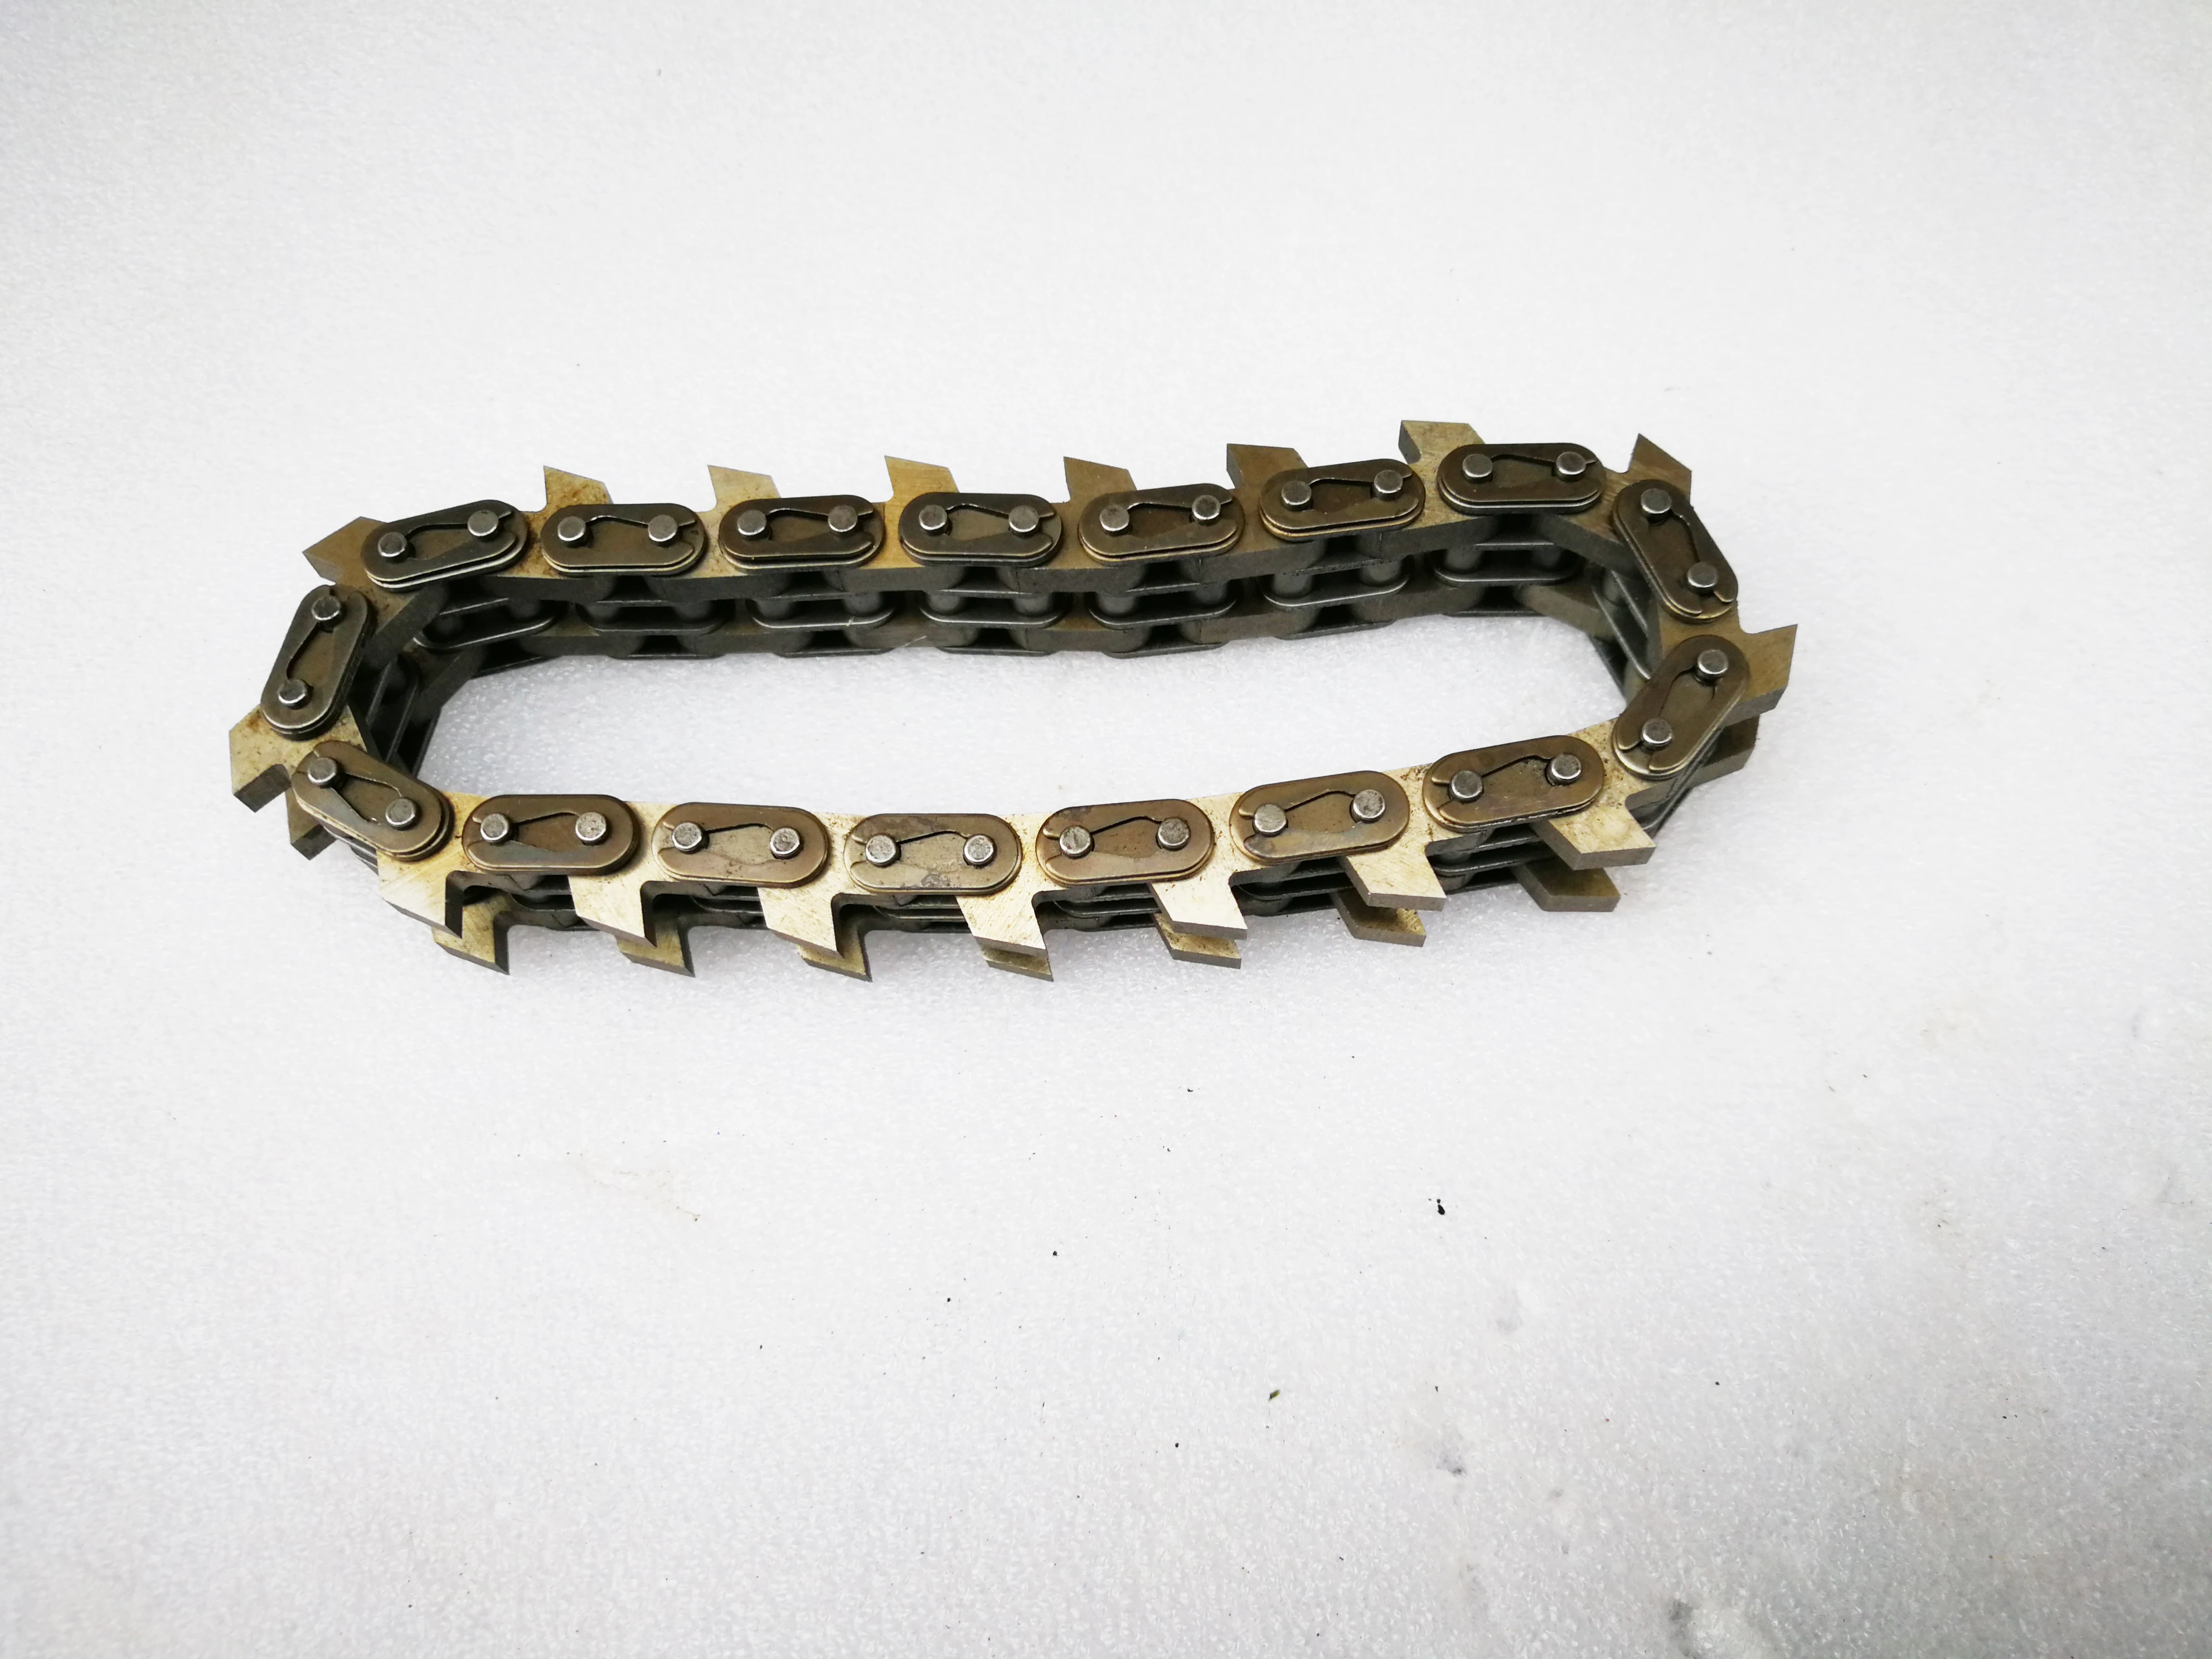 17 Row One Tip Middle Tooth Joint Cutter Saw Chain For Pneumatic Waste Stripper Carton Paper Stripping Machine Detachable Hinge enlarge